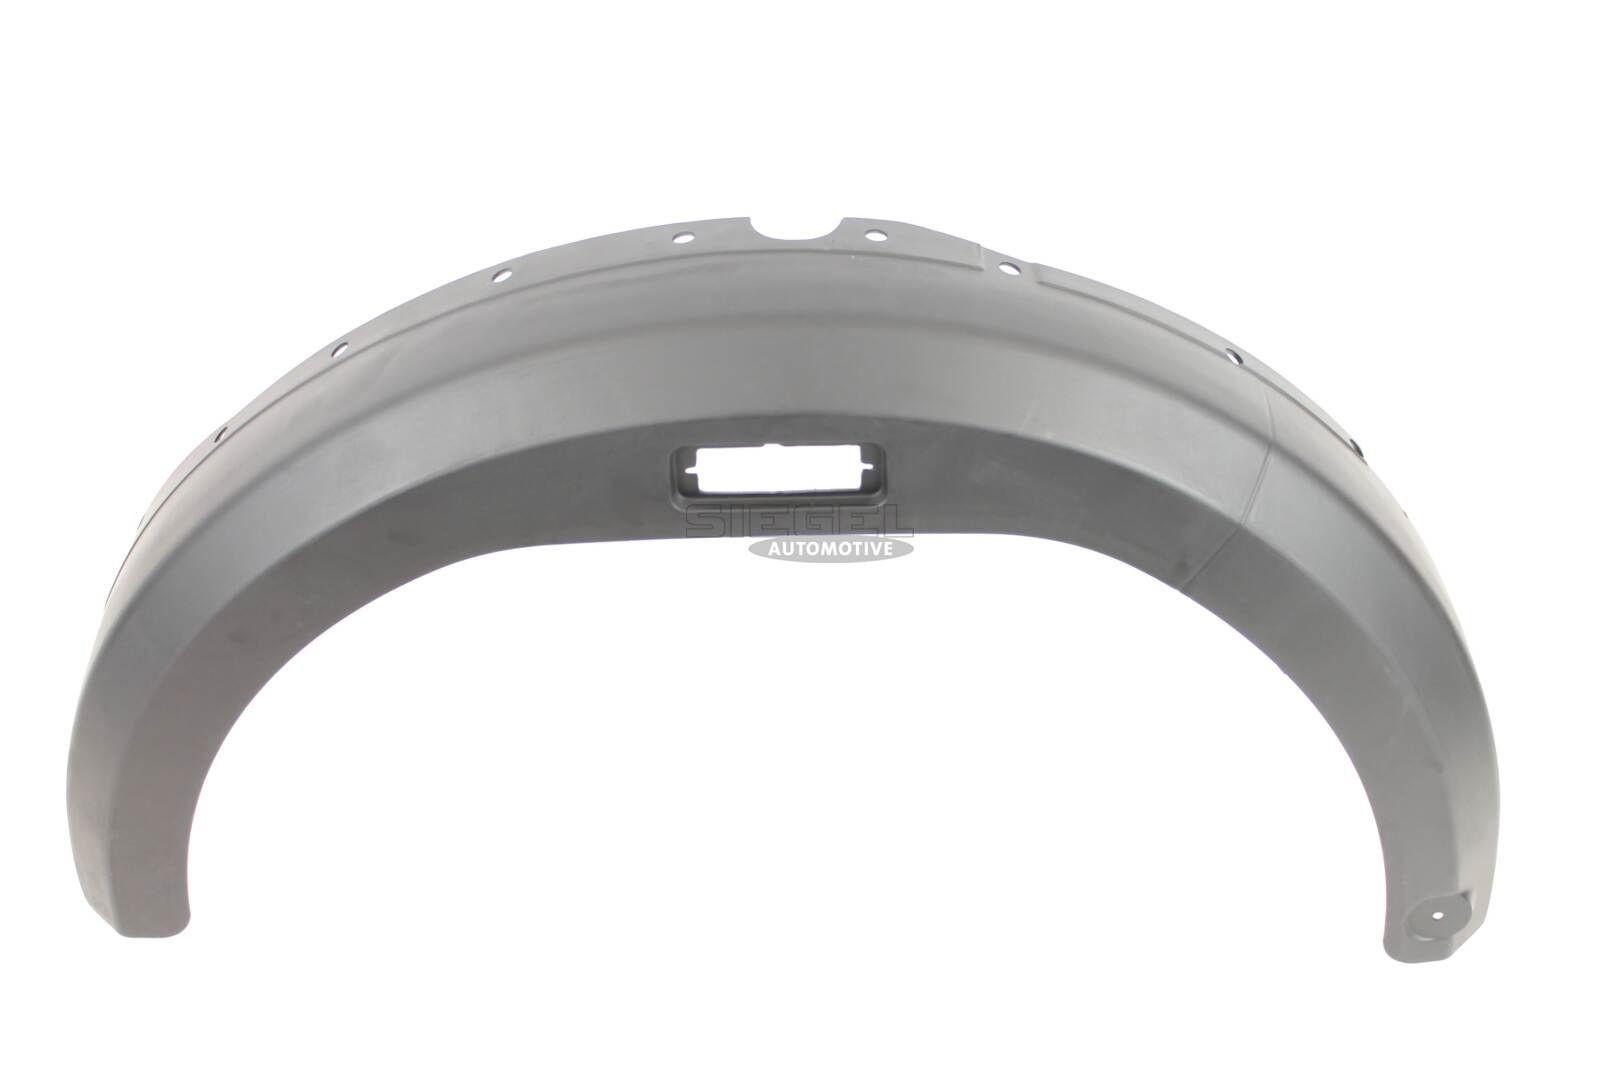 SIEGEL AUTOMOTIVE SA2D0719 Wing fender MERCEDES-BENZ experience and price